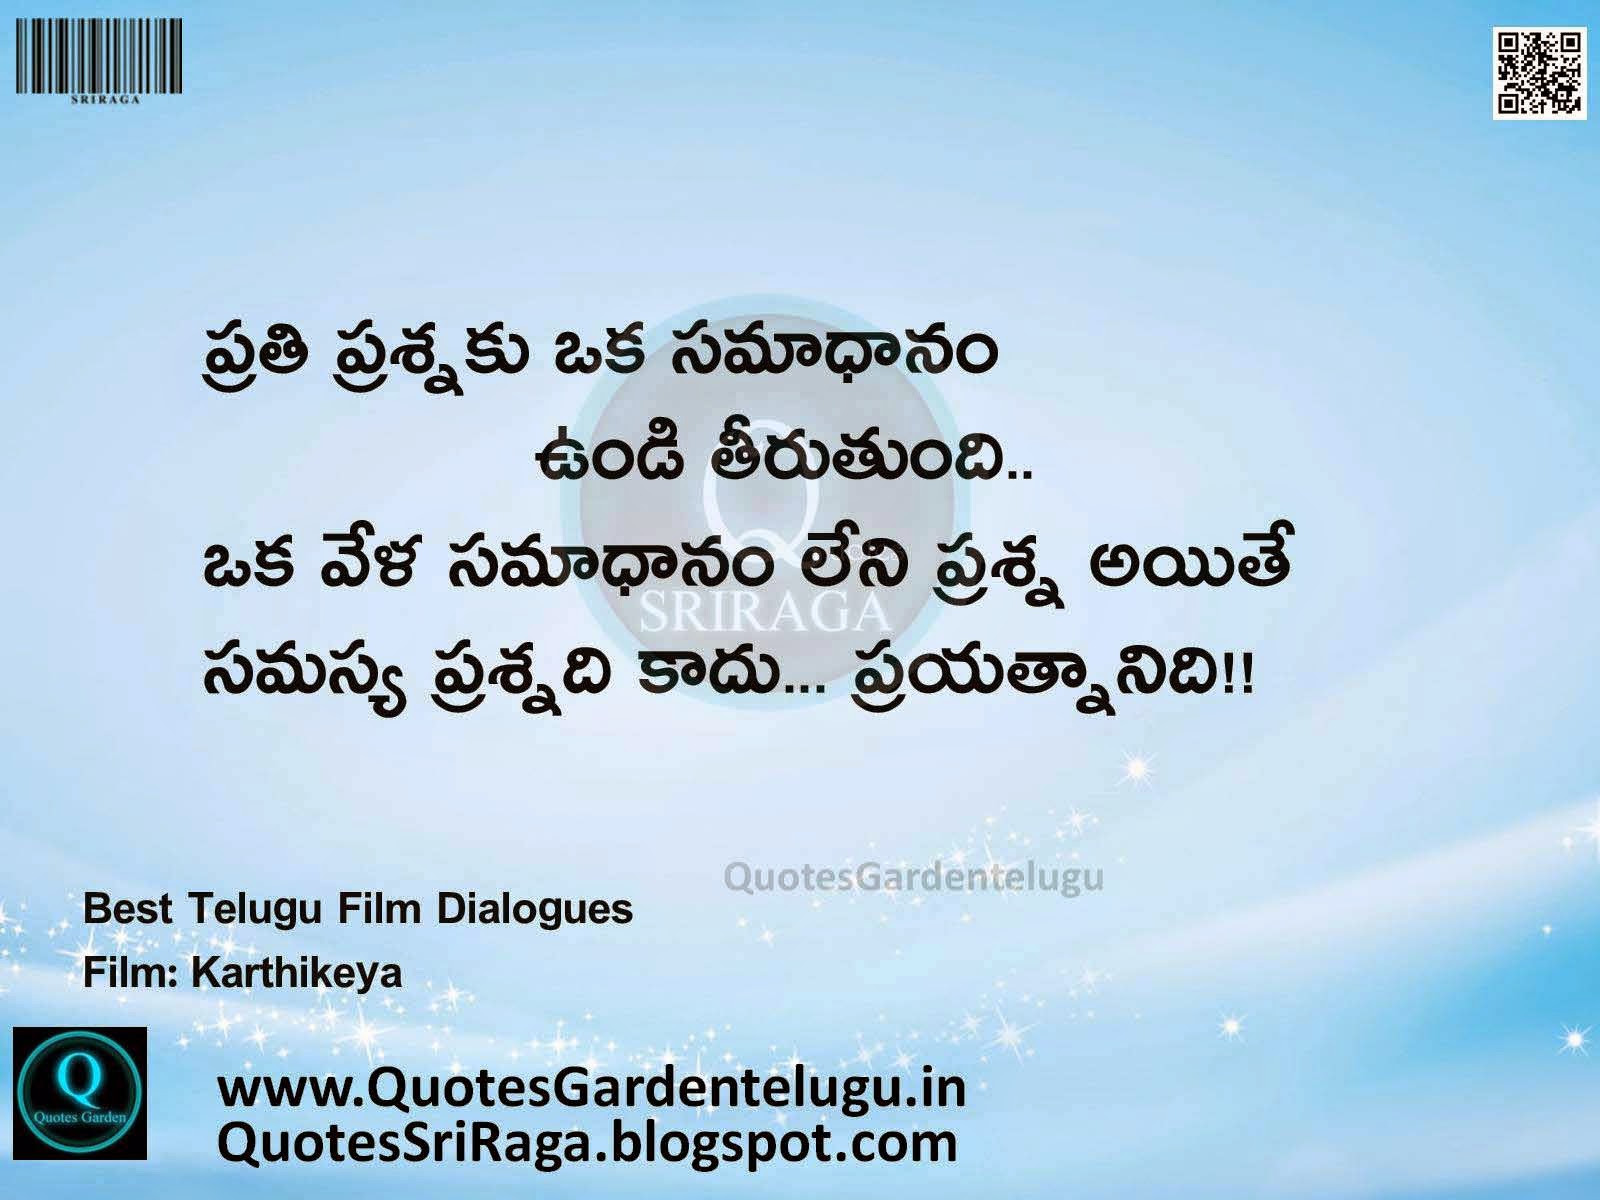 Best Telugu Film Dialogues Telugu Film Inspirational Dialogues Punch Dialogues Quotes with images